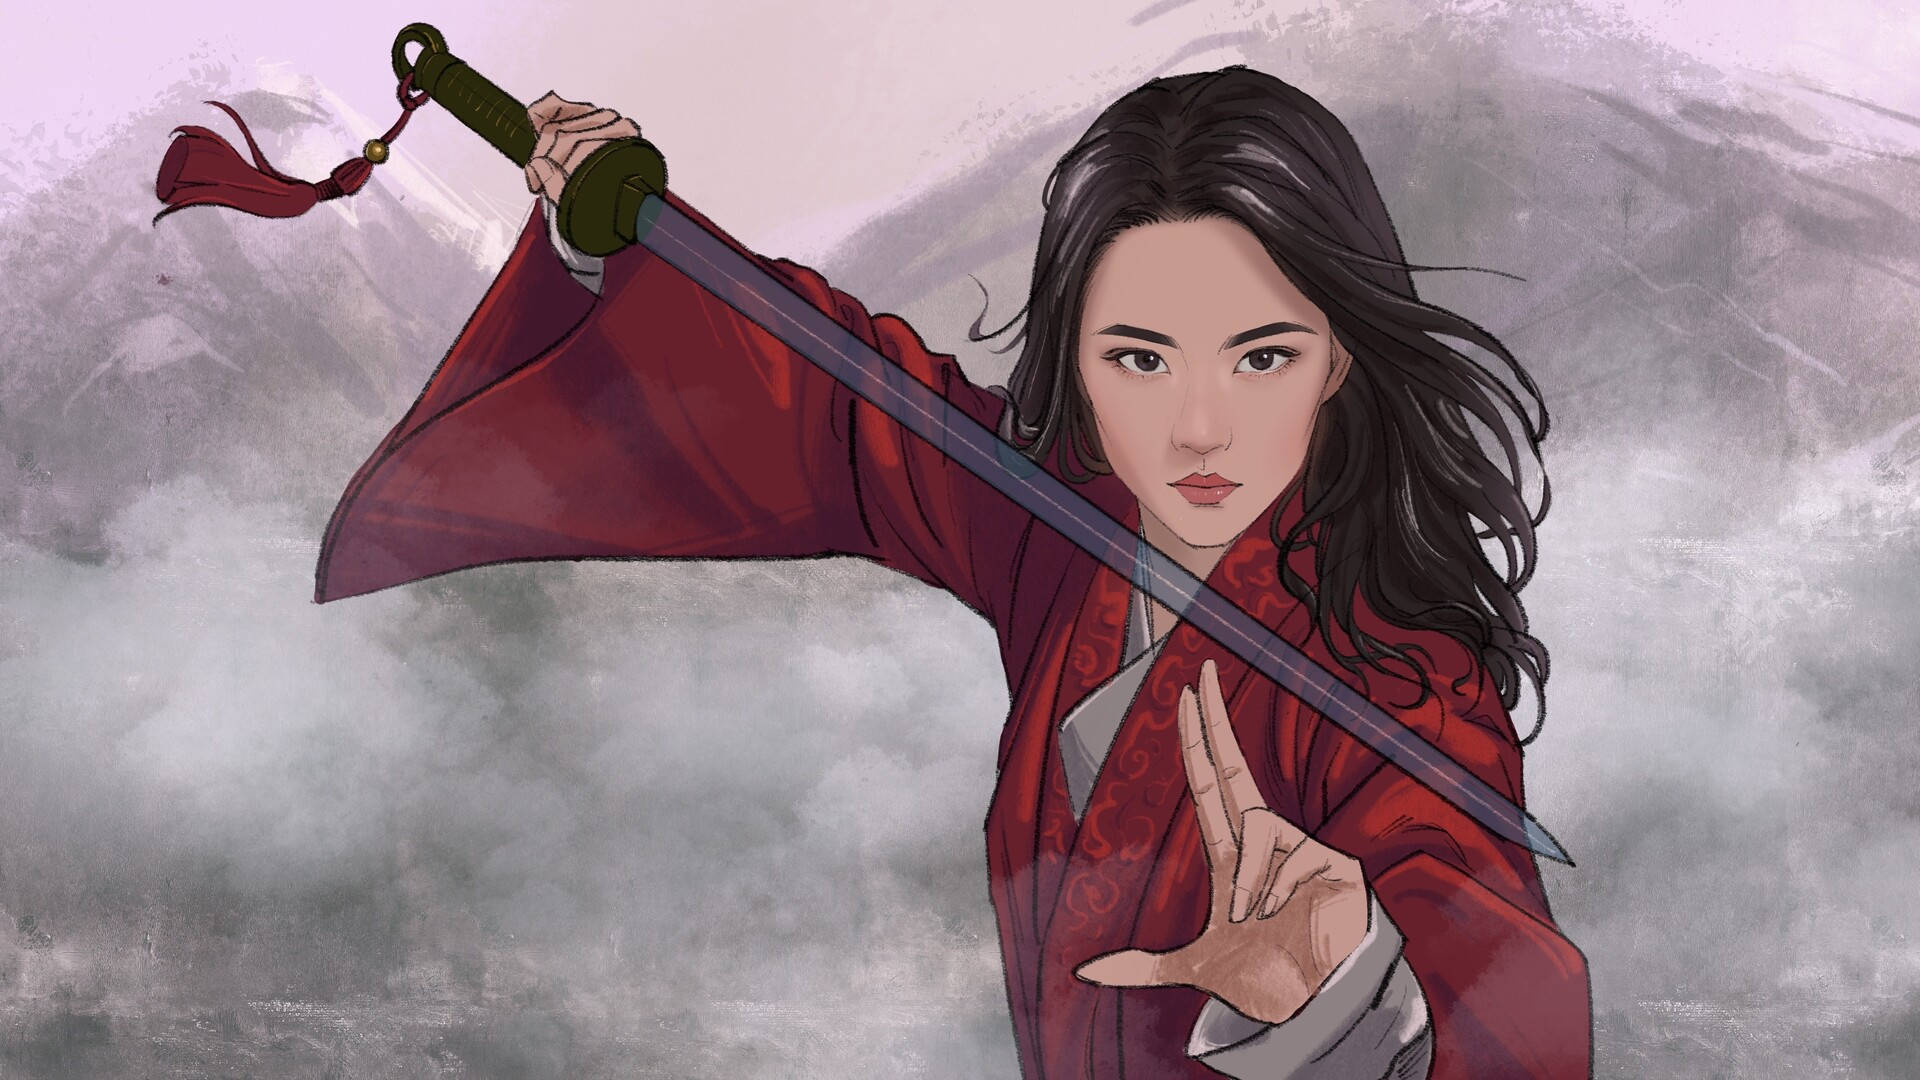 Be A Warrior, Be Strong Like Mulan. Background